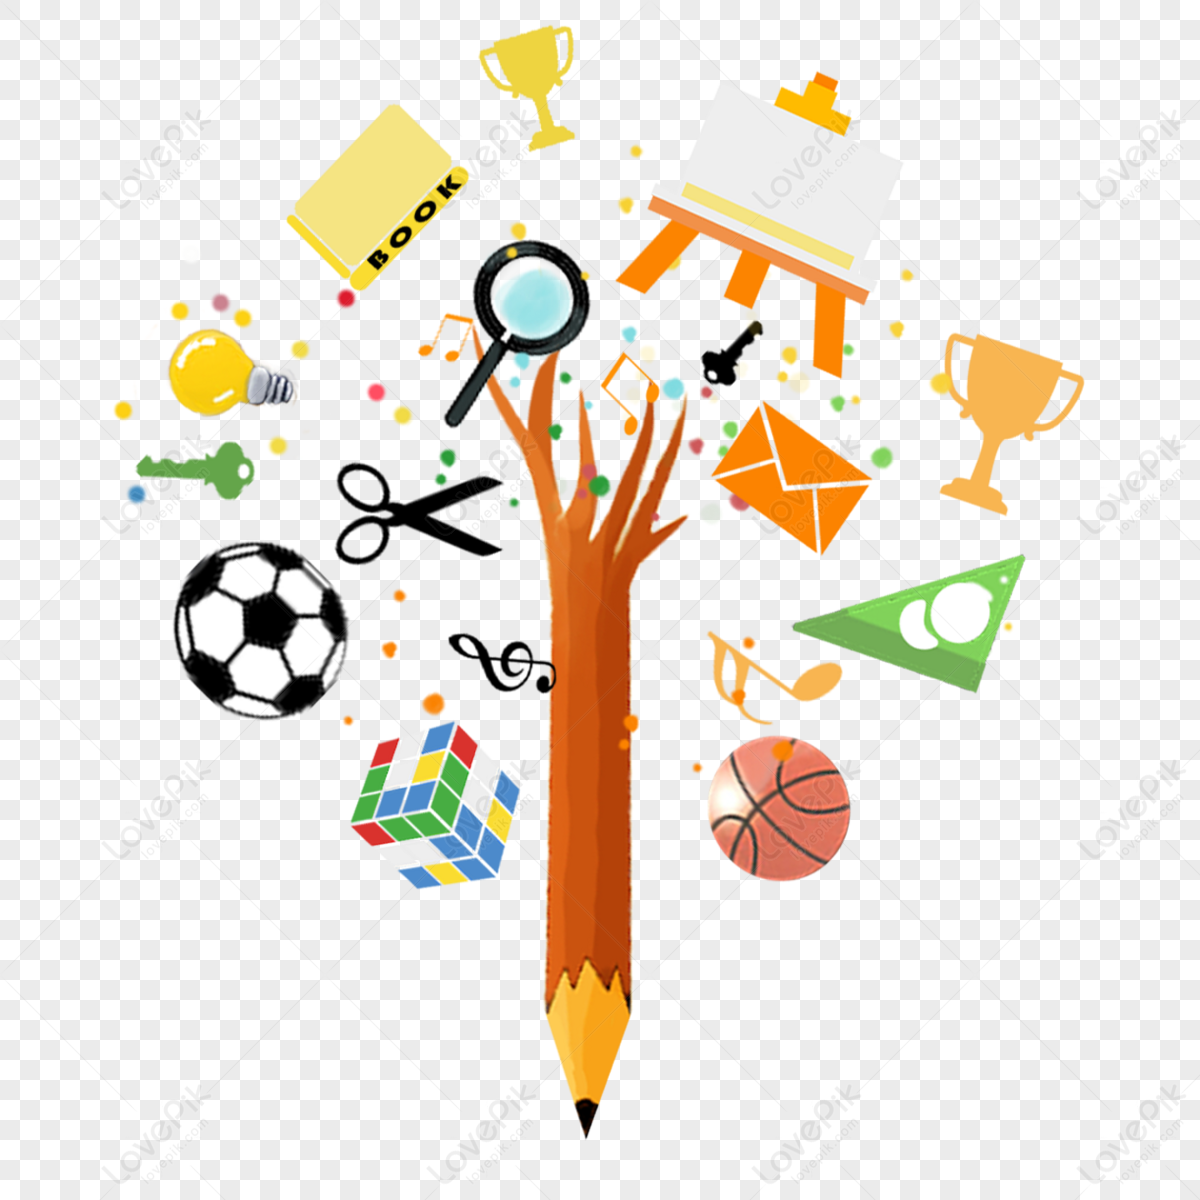 Knowledge Tree Students Learn Stationery Elements for Returning to School,school opening,box png image